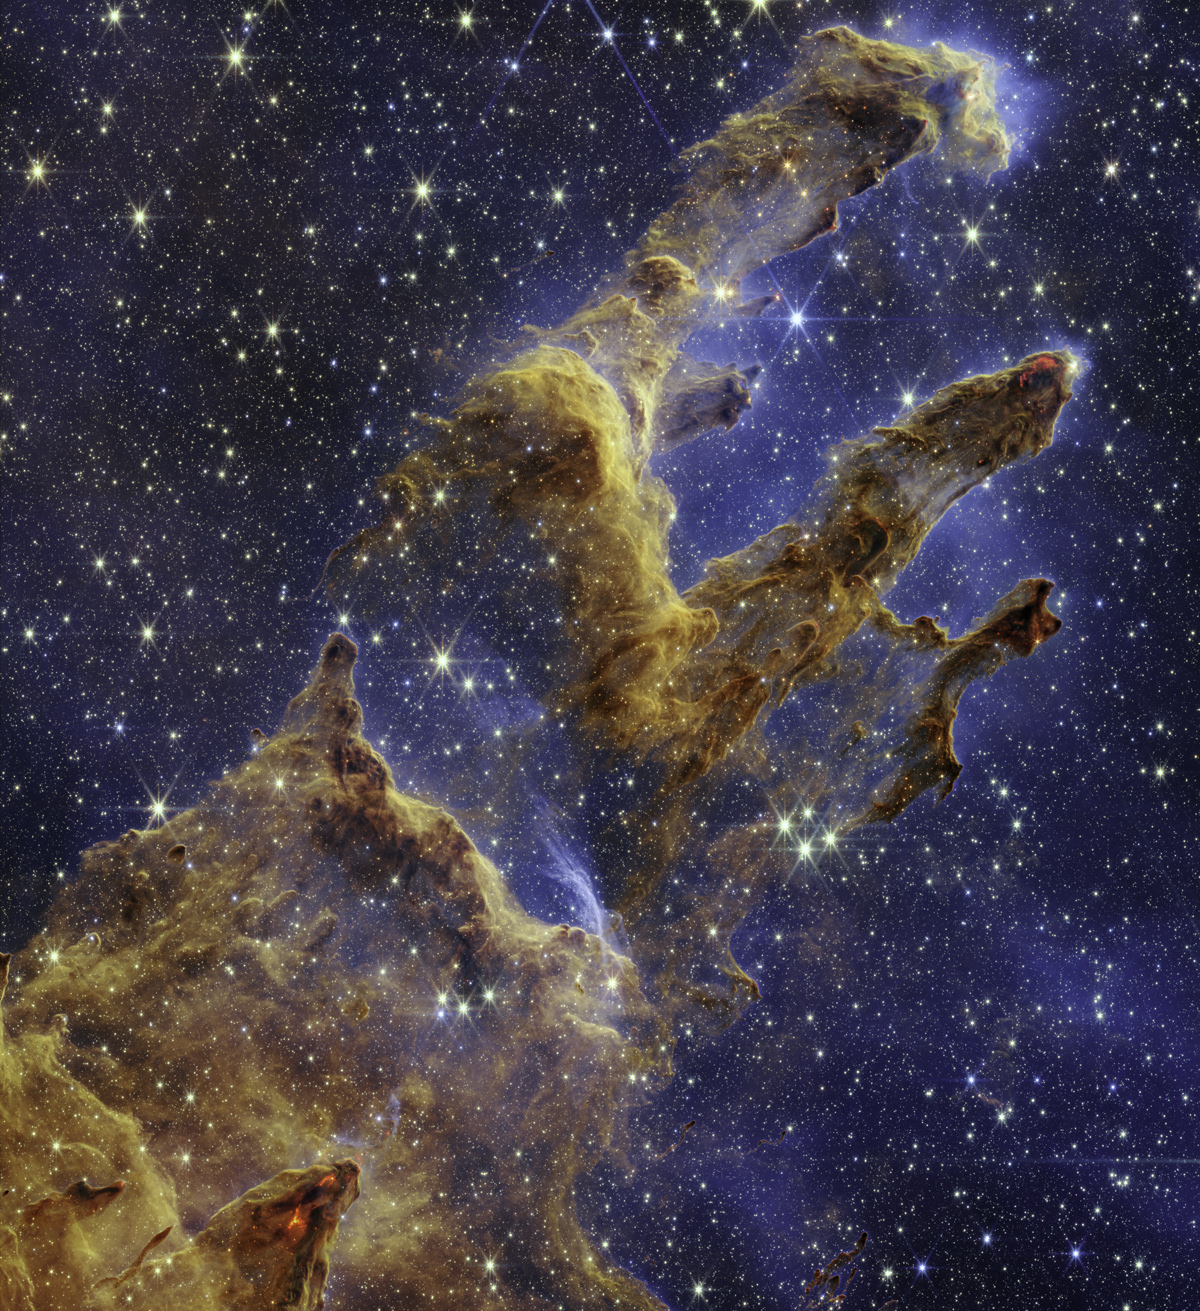 The Pillars of Creation as seen by the James Webb Space Telescope.